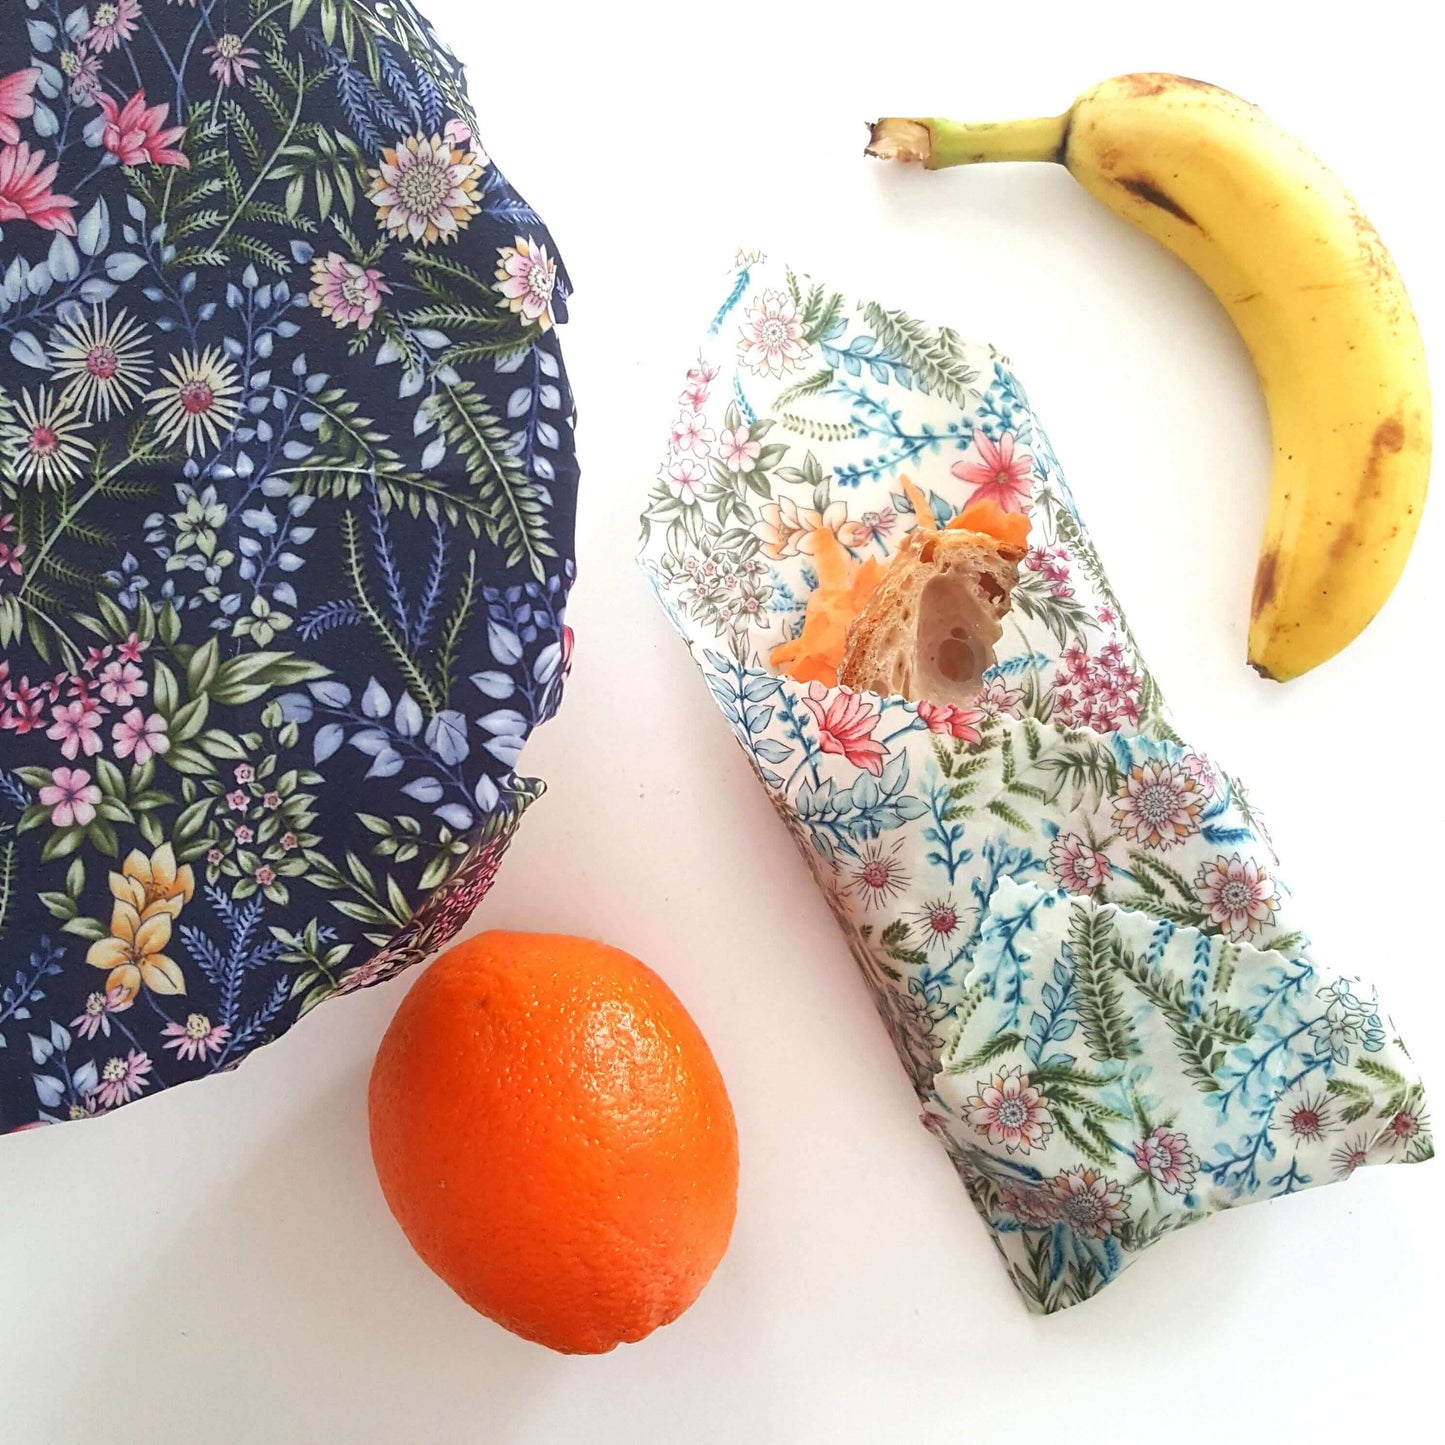 Reusable Beeswax Food Wraps 100% Hand Made in the UK by Honey Bee Good shown in Set of 3 Classic Botanical flatlay